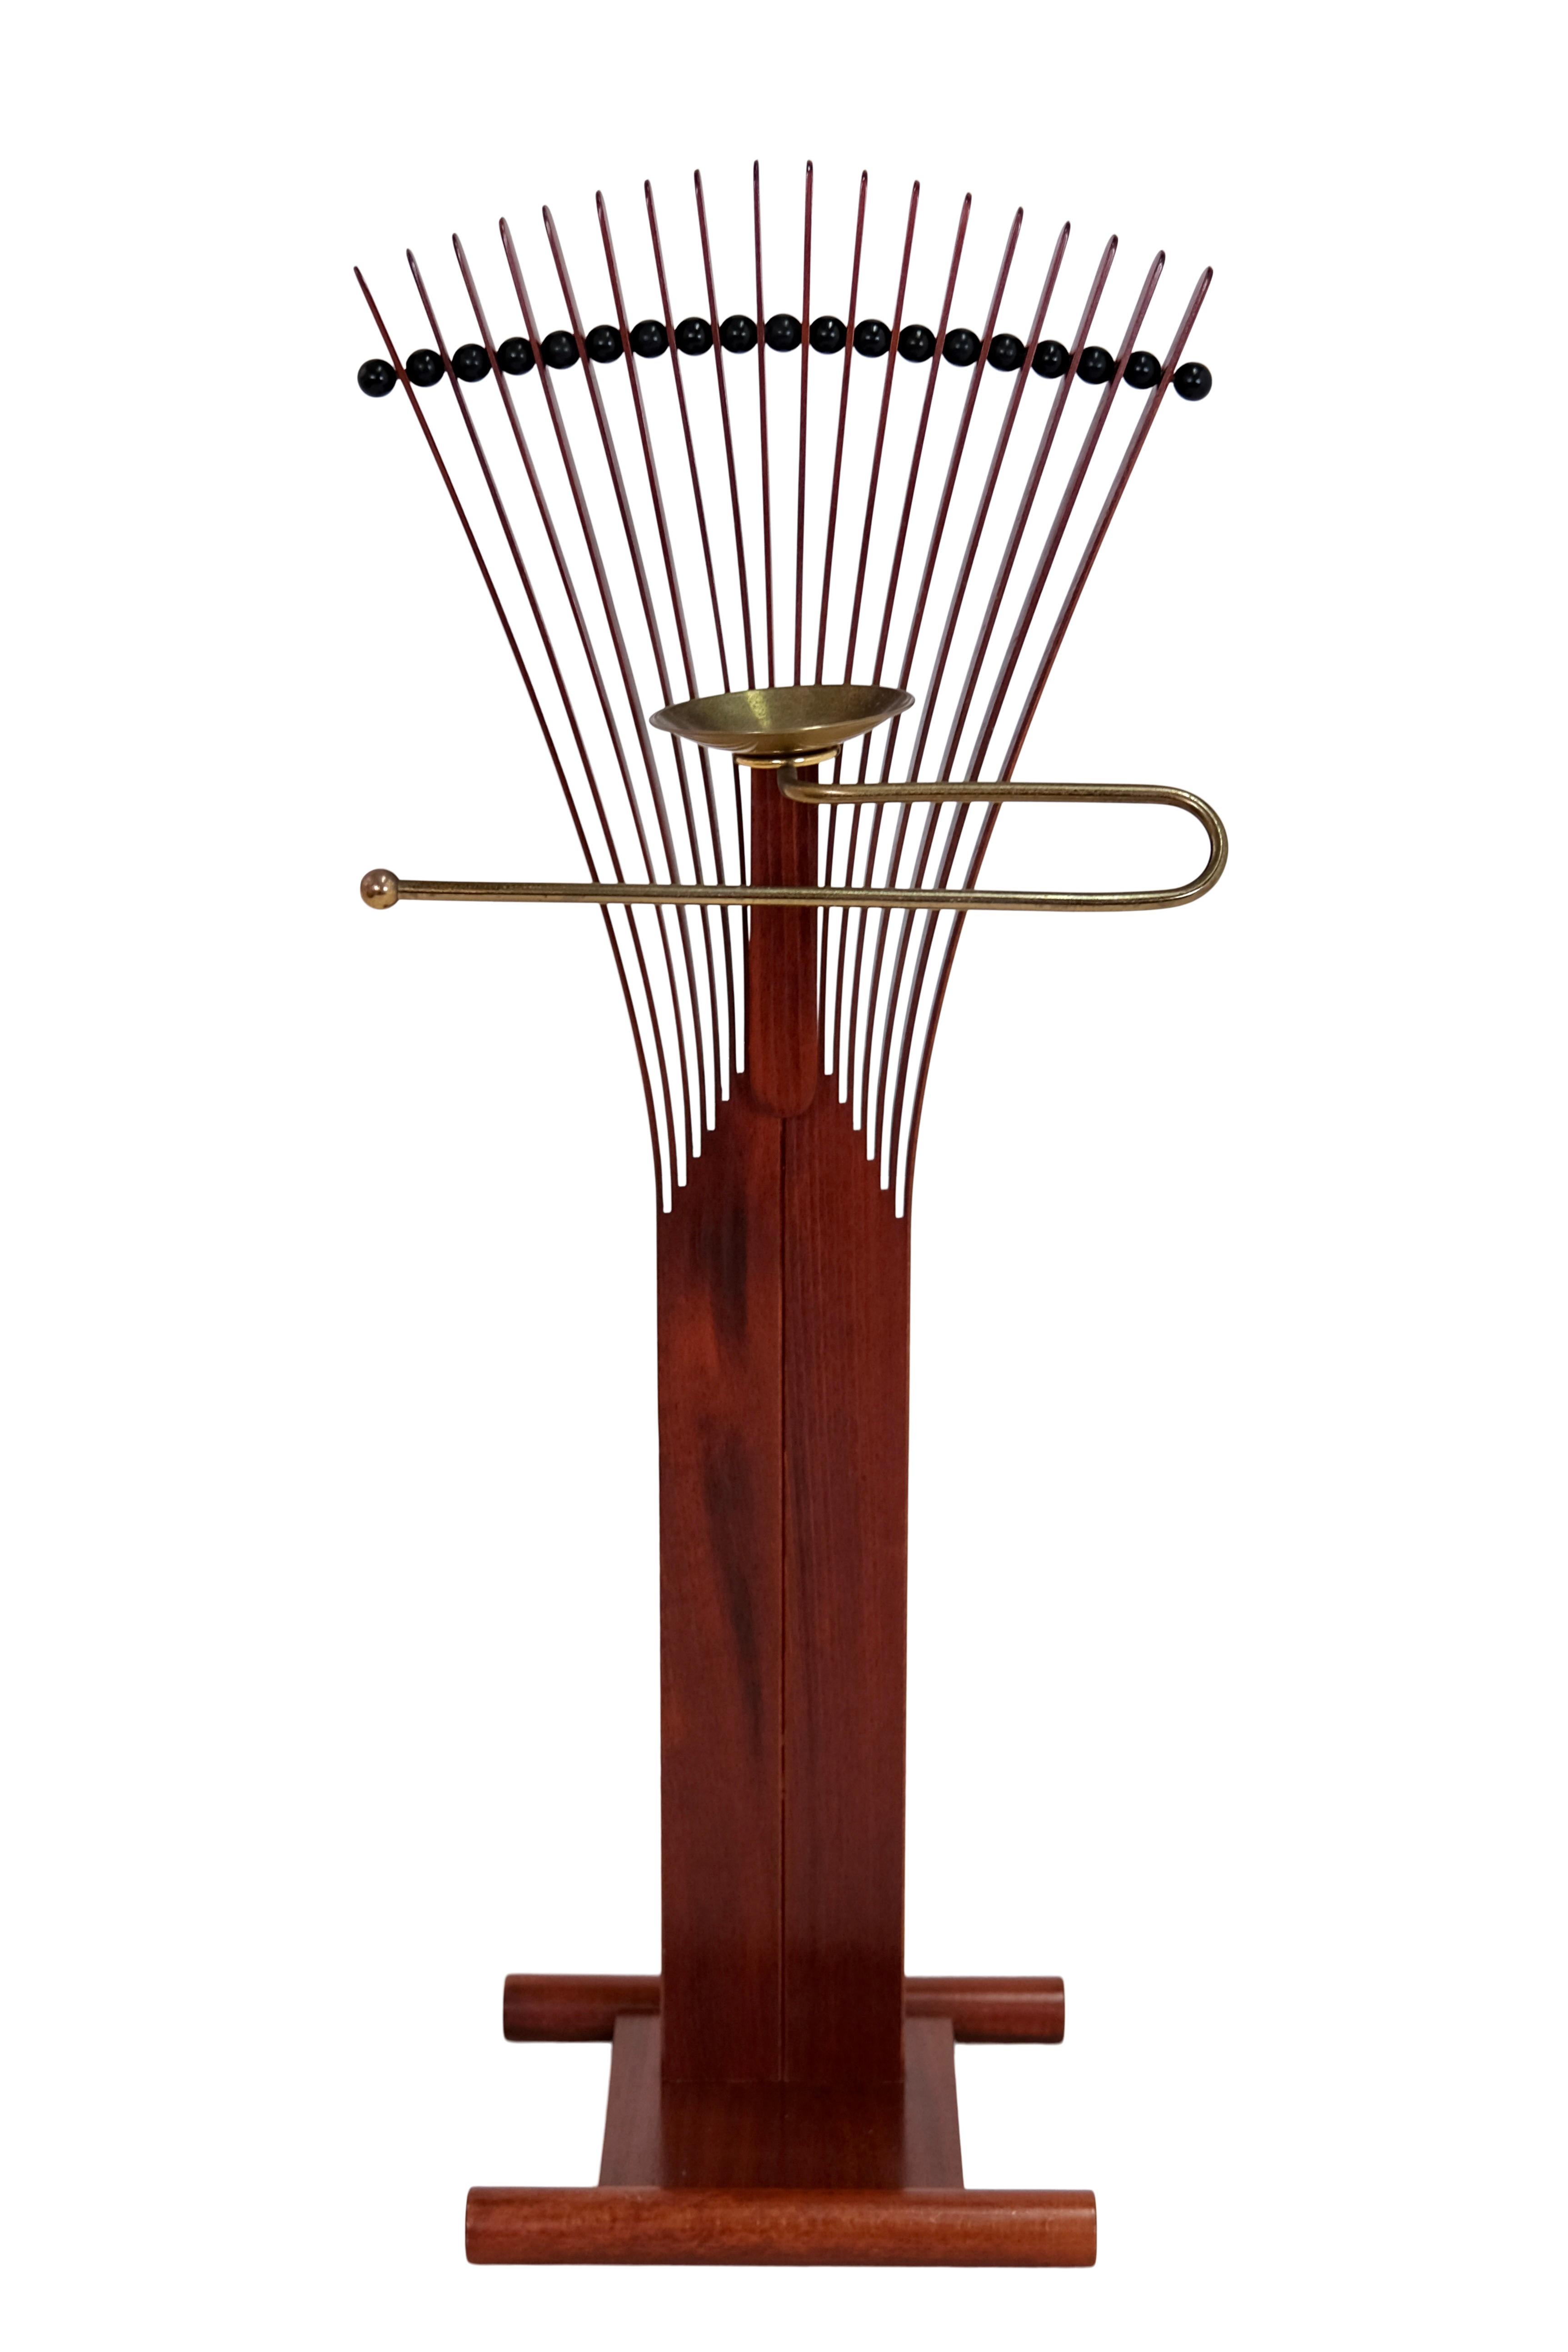 1930s Art Deco Valet of Chamber in Mahogany with Hammered Brass In Good Condition For Sale In Ulm, DE